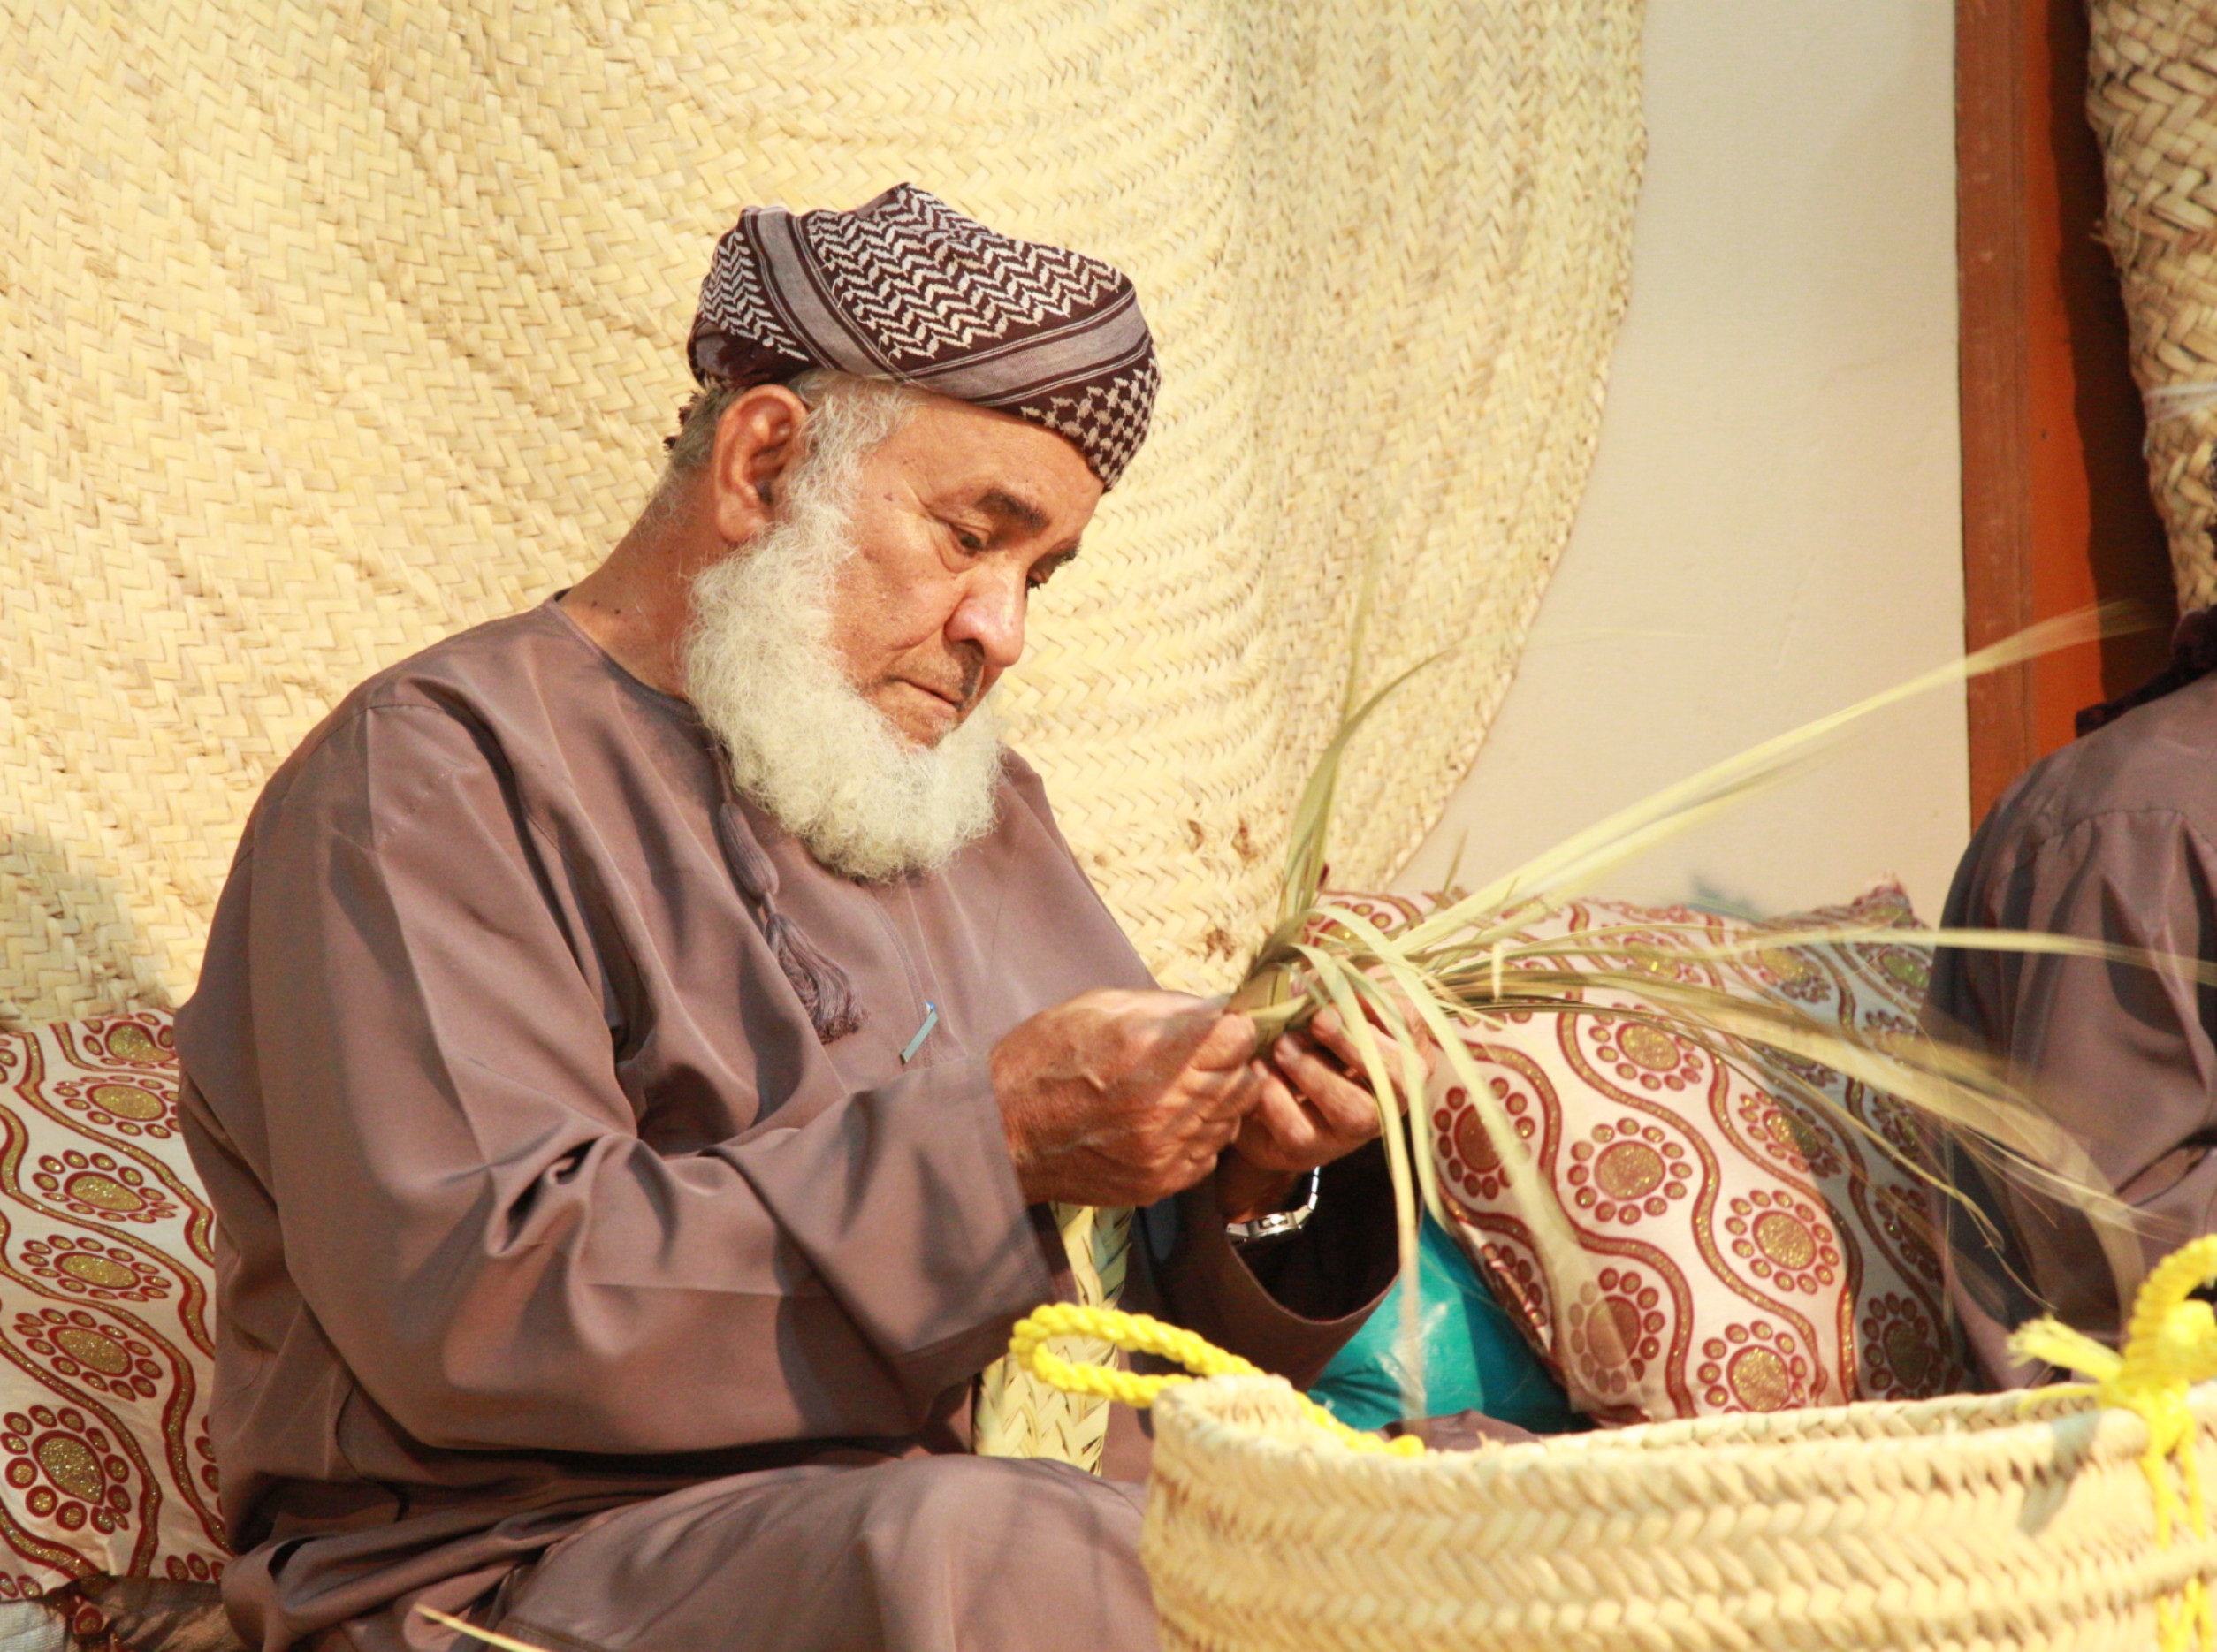 Wilayat Manah showcases its culture and tradition